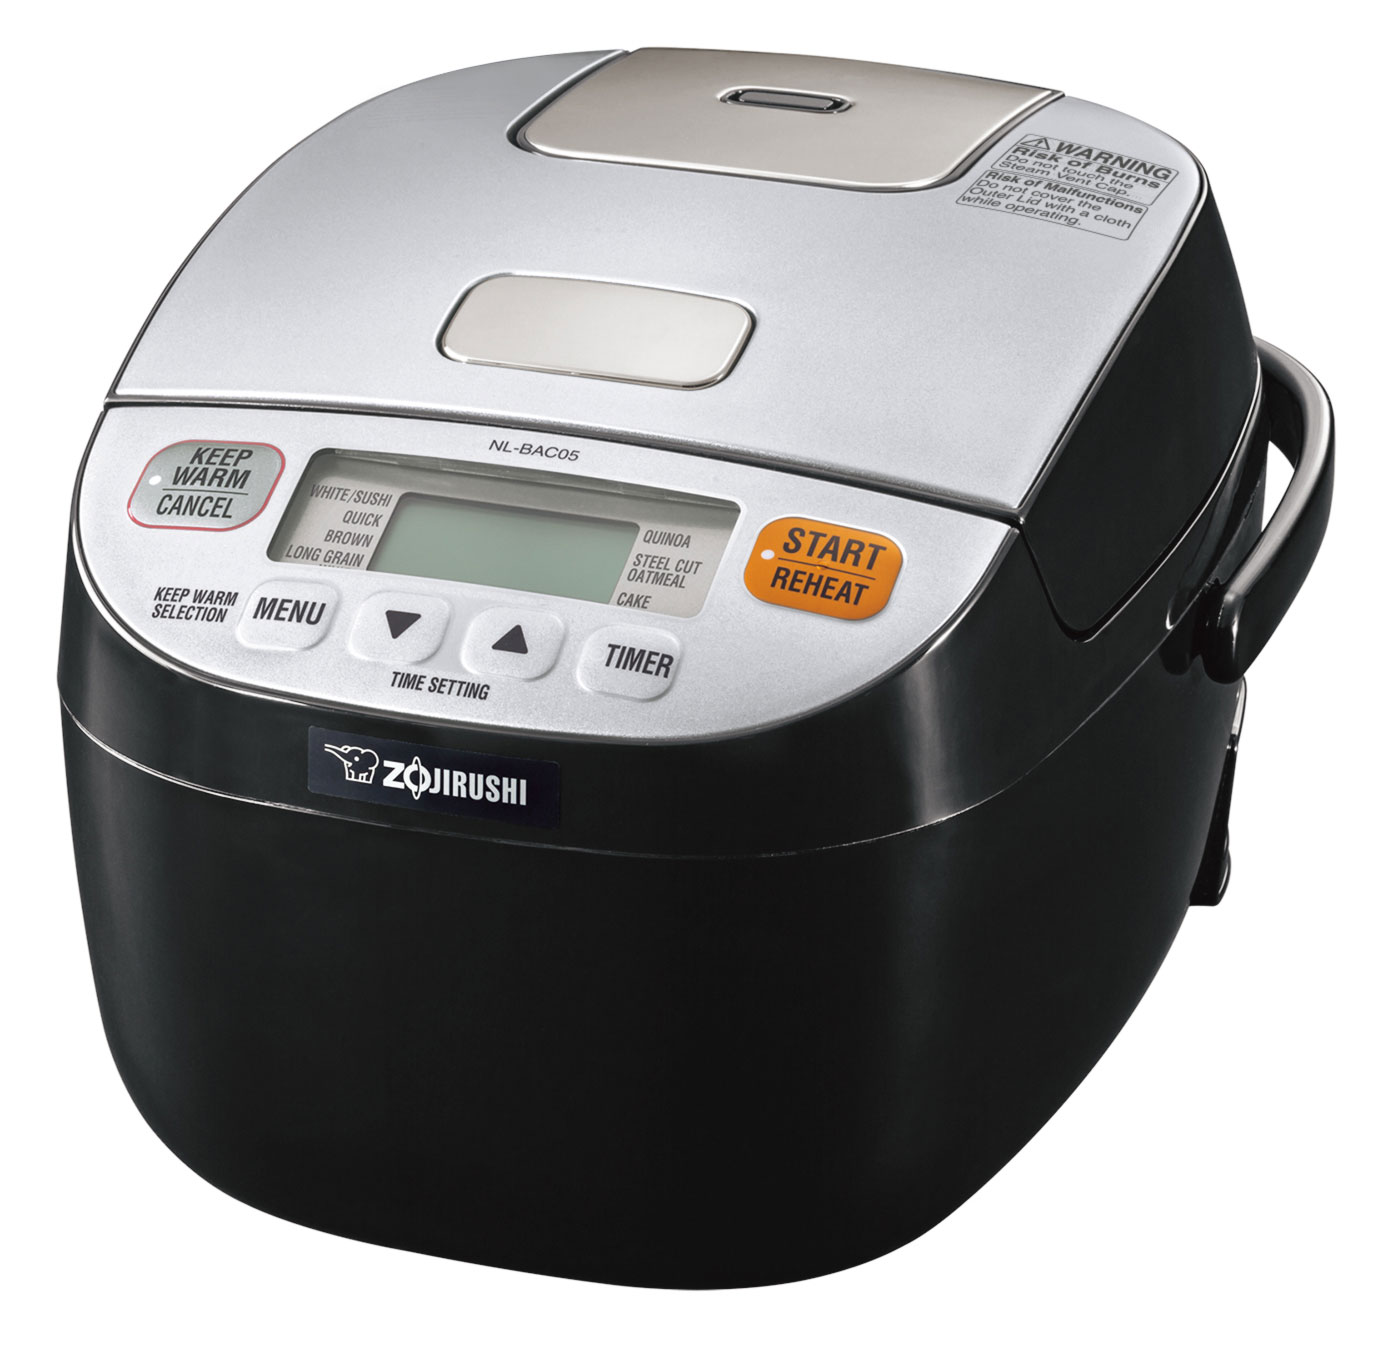 Zojirushi America Corporation - It's not too late to grill your